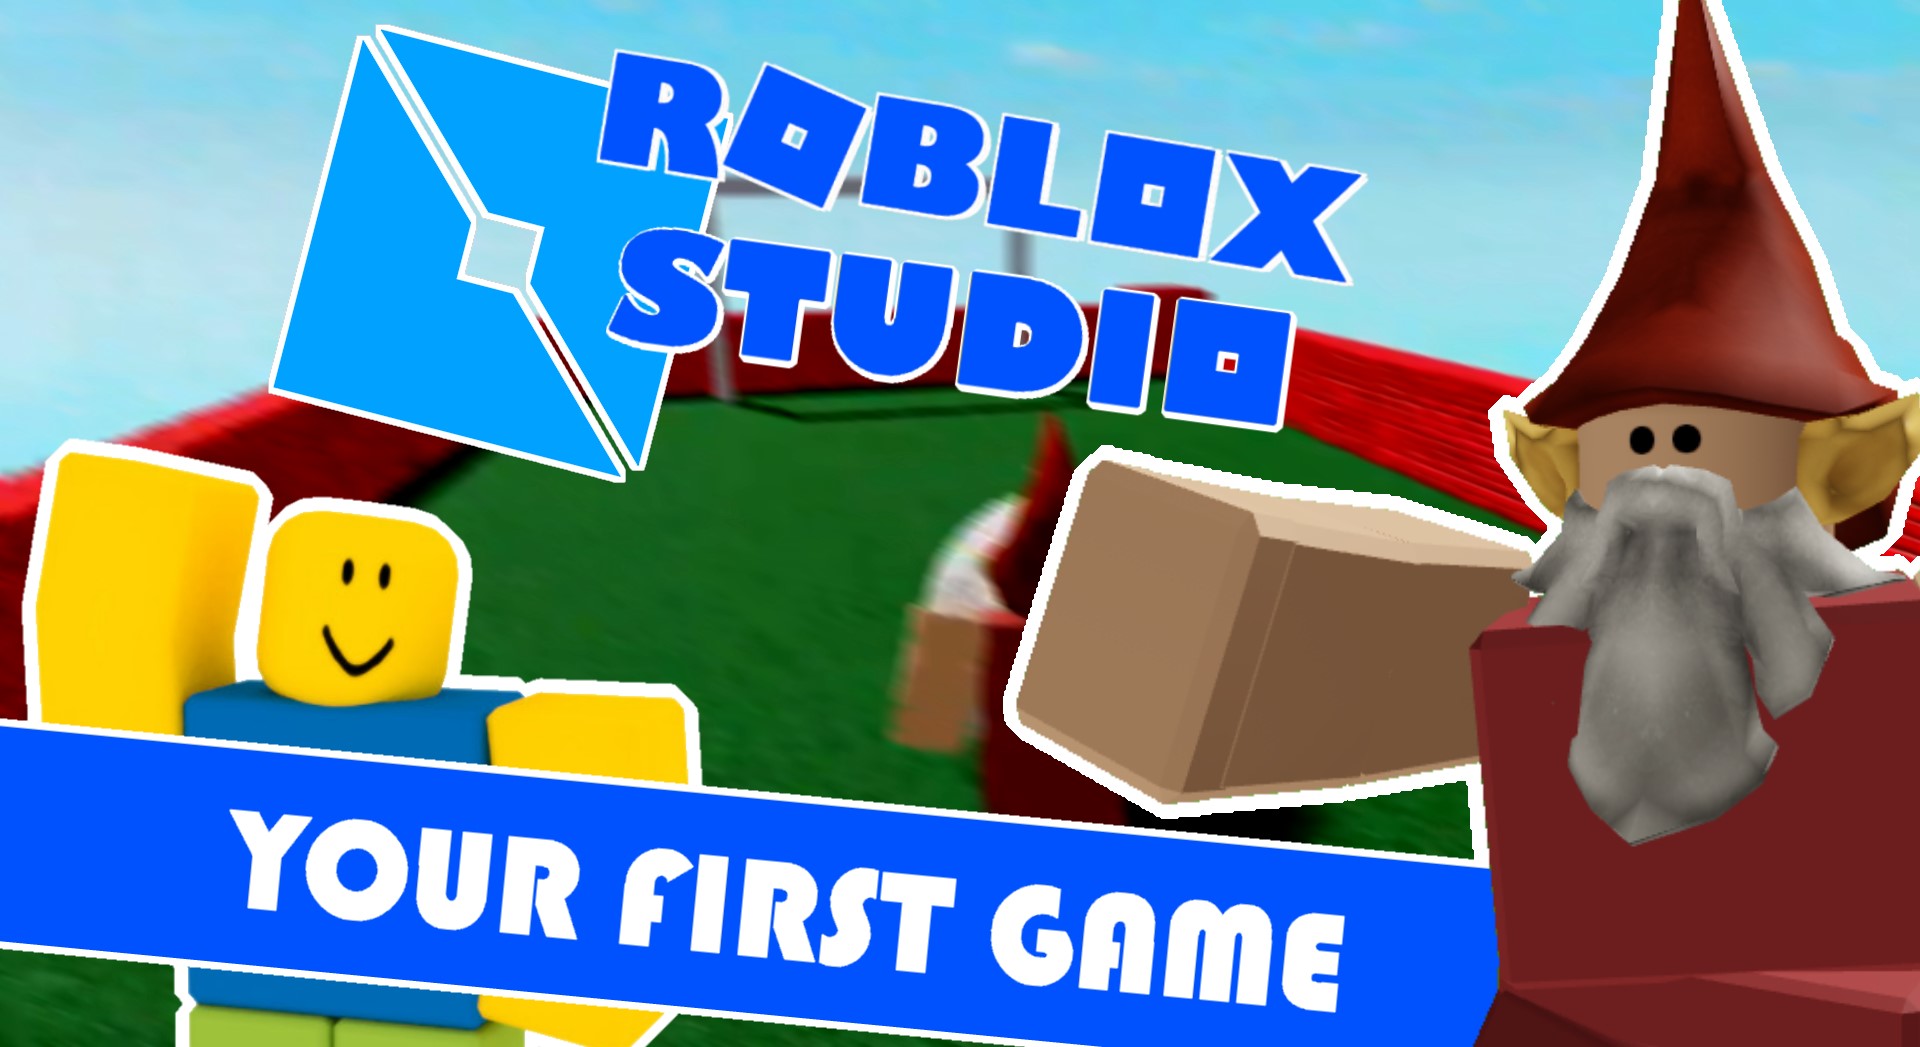 Be your Roblox scripter, build a complete Roblox game